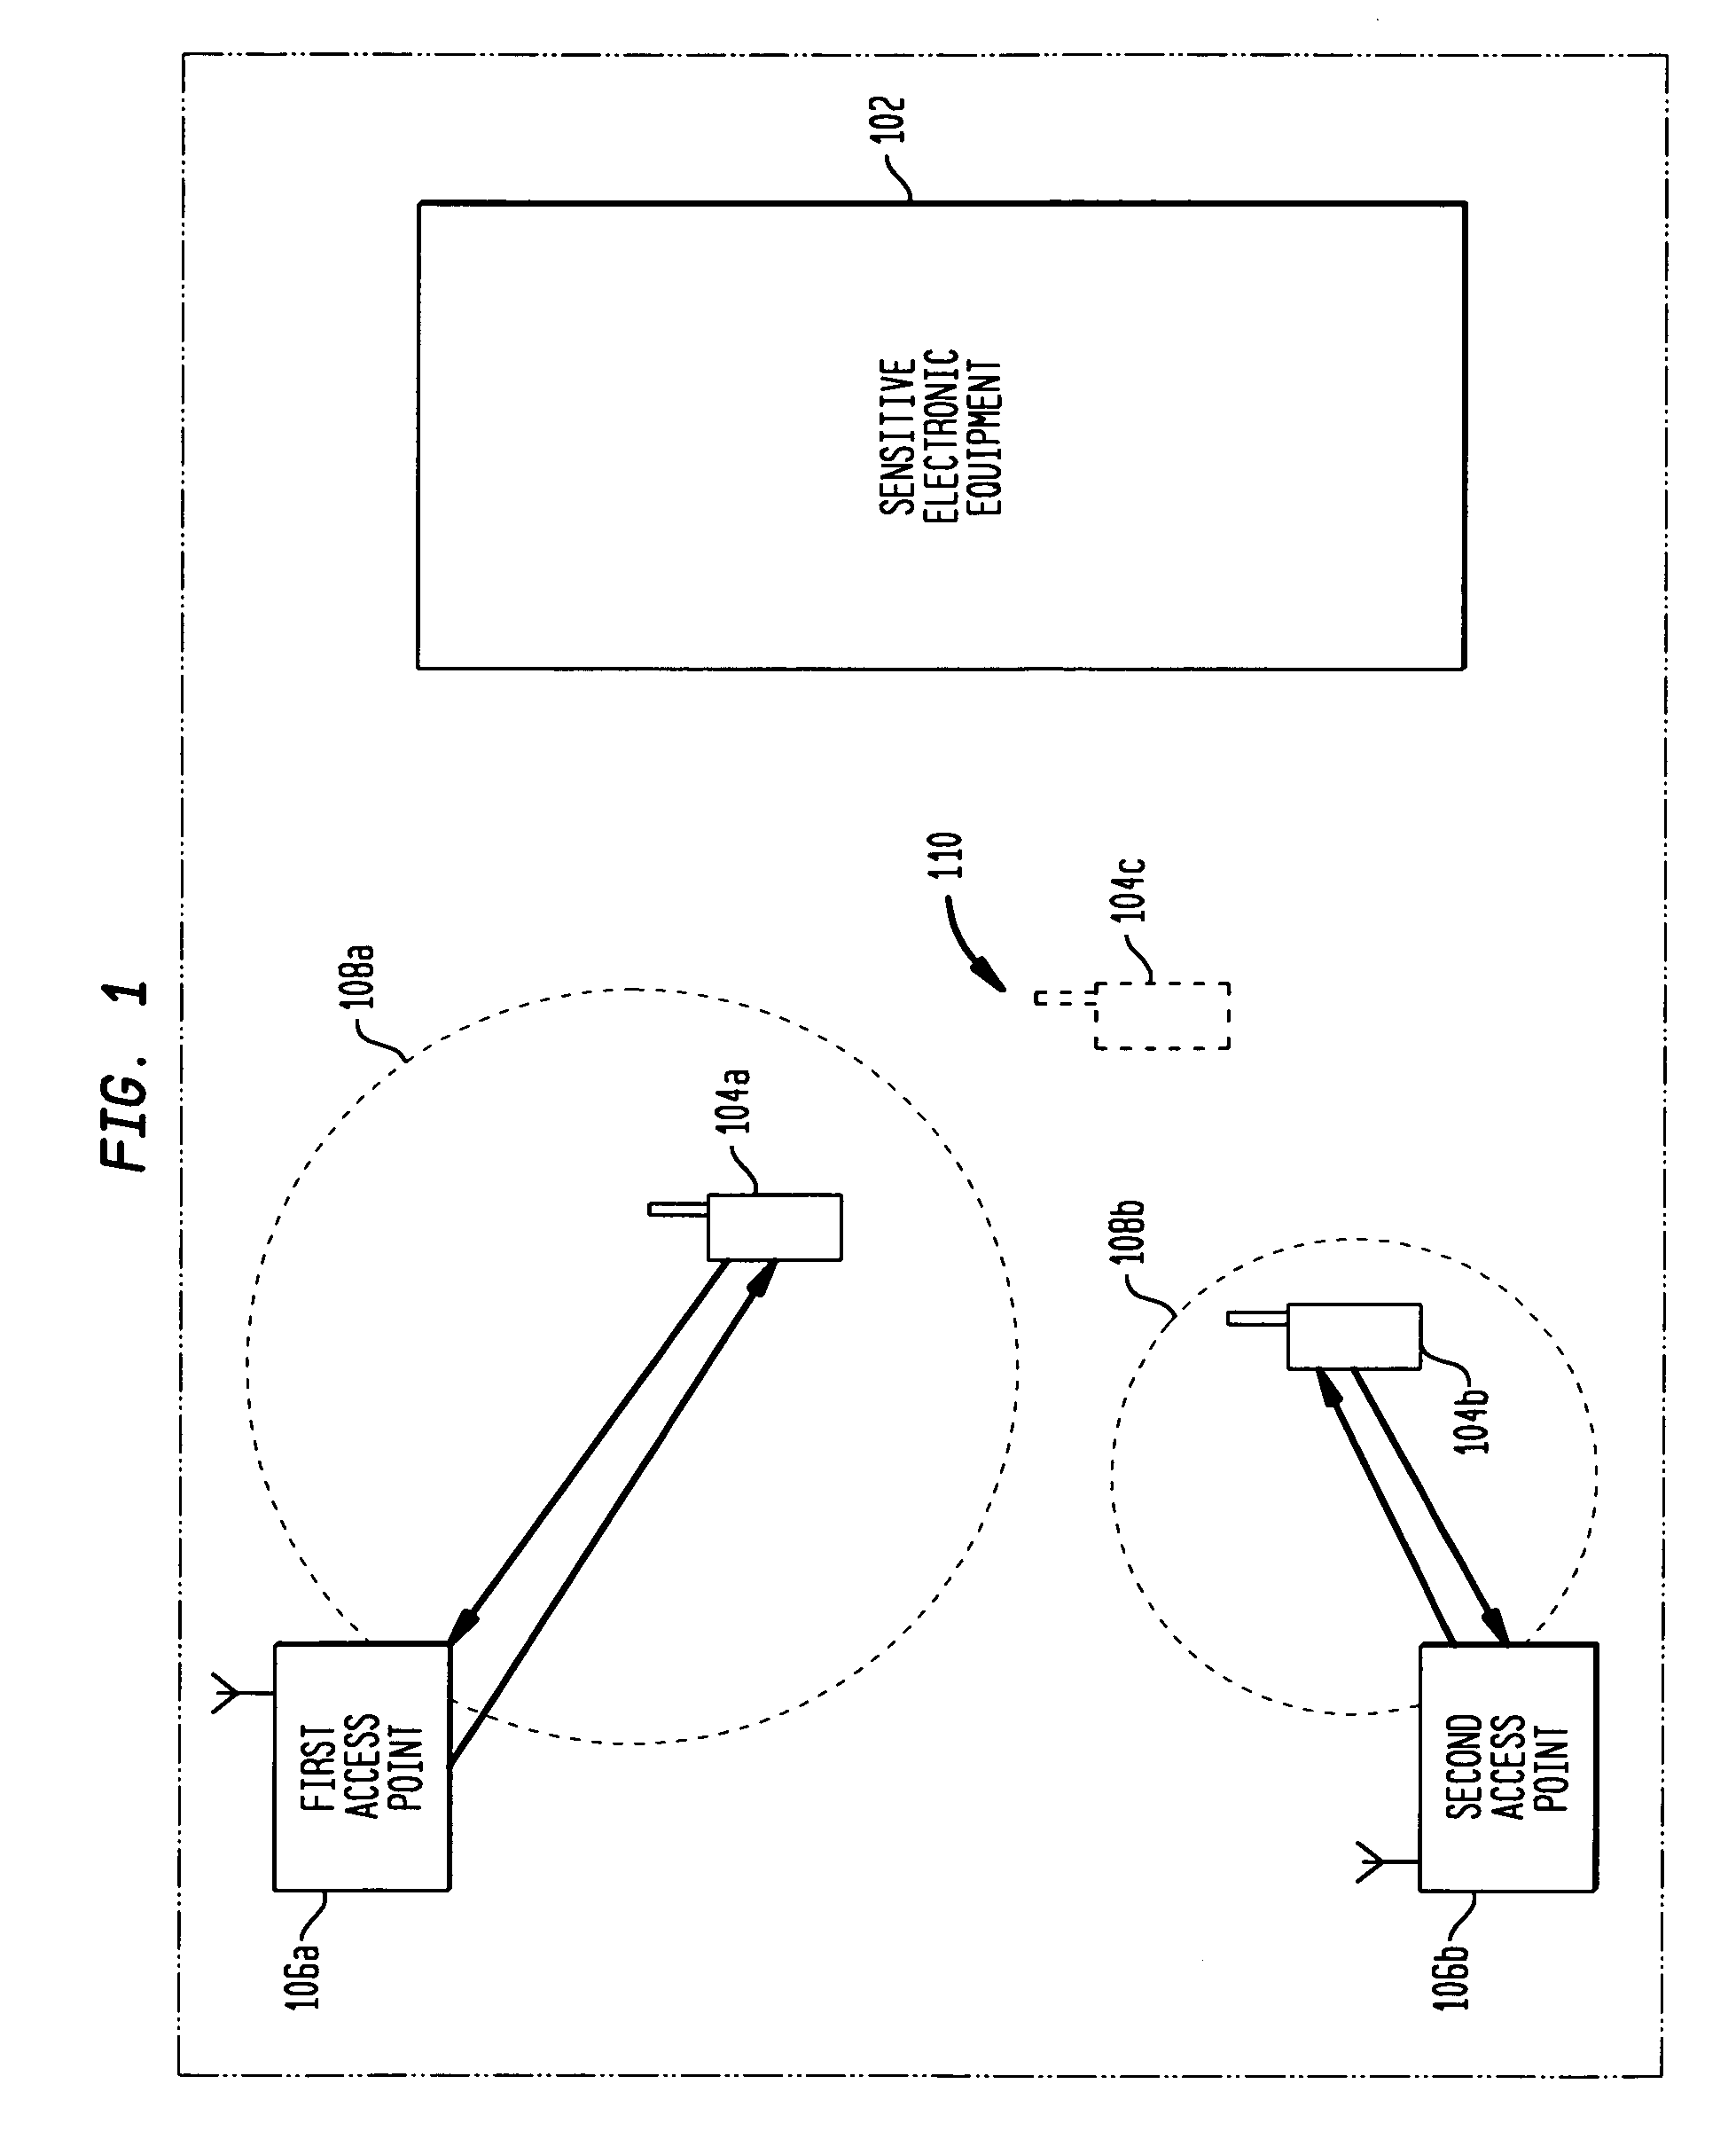 Method and apparatus for reducing interference associated with wireless communication